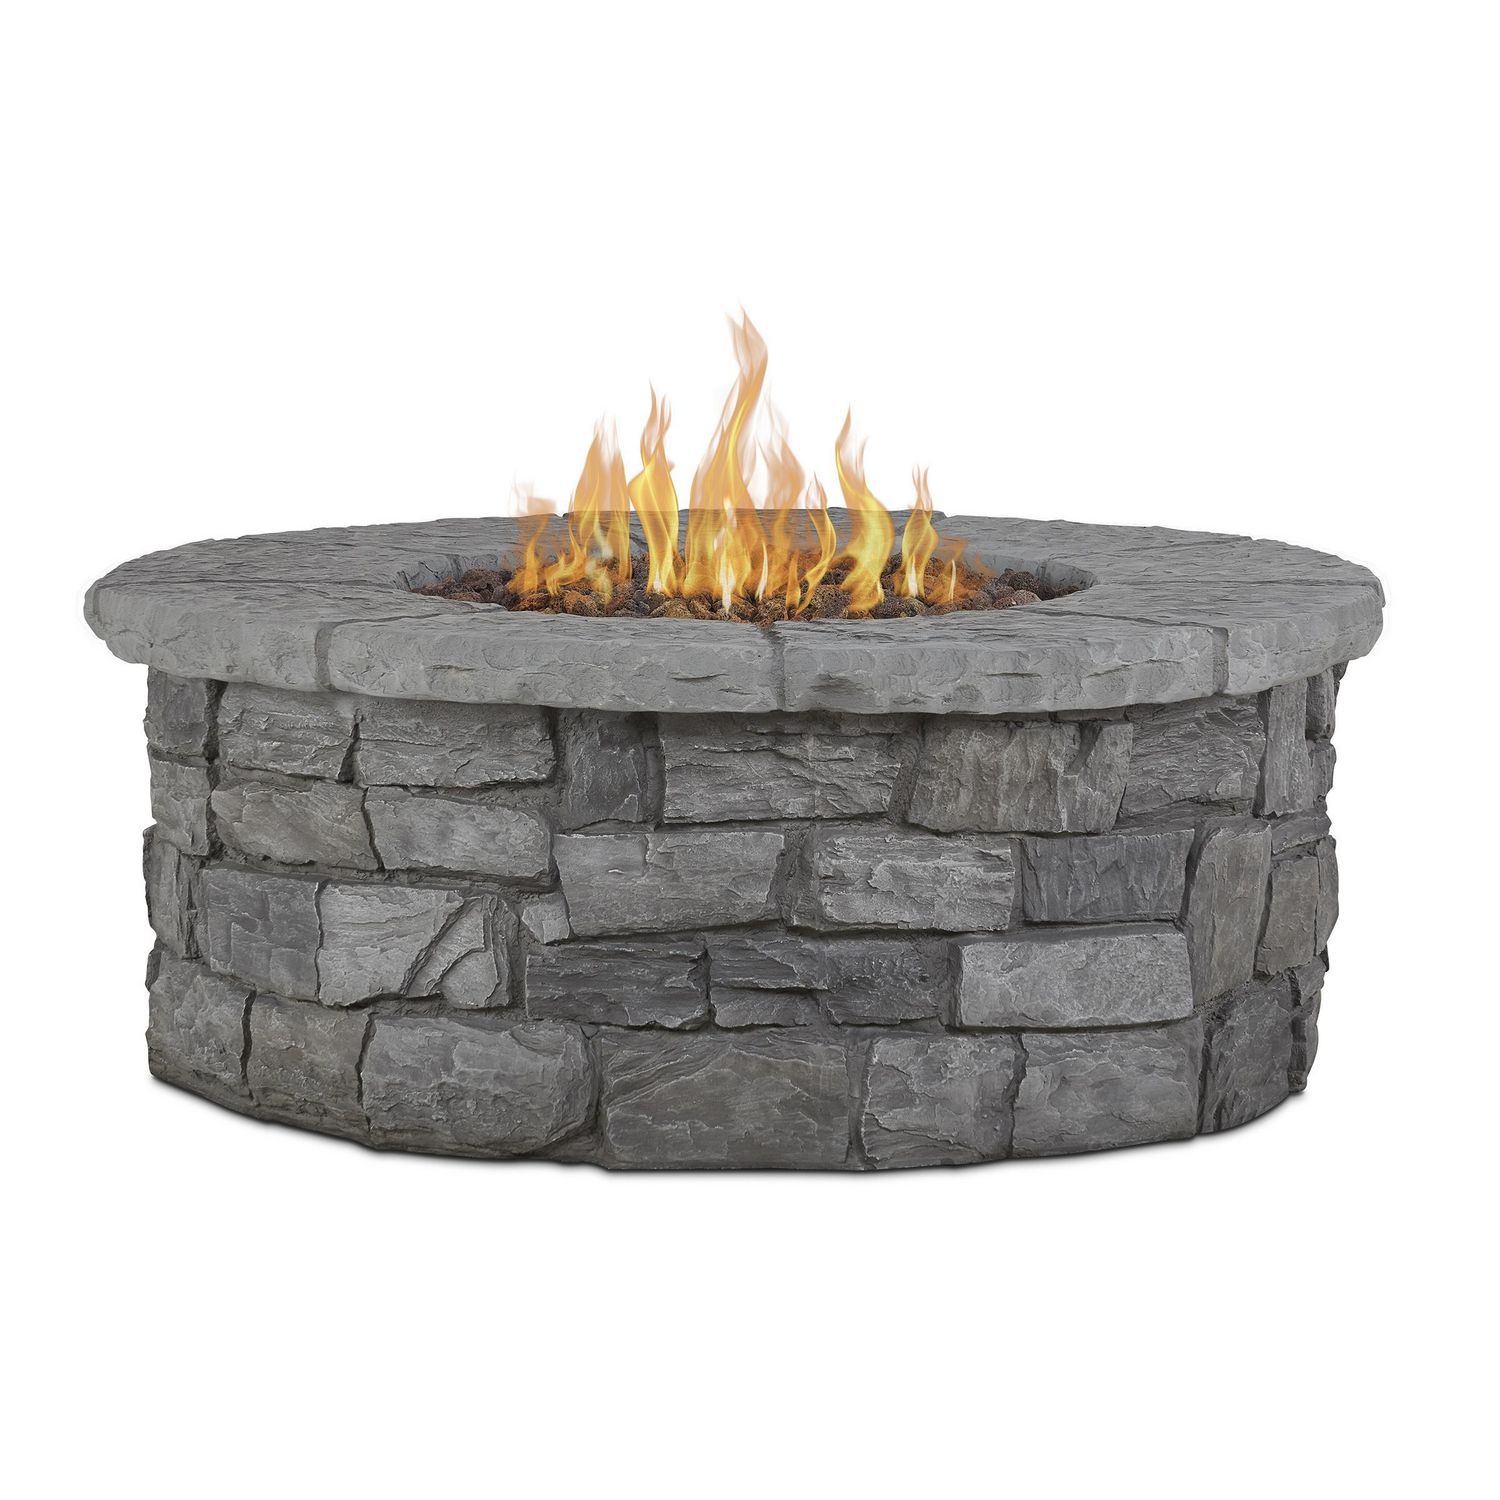 Sedona Round Propane Fire Table In Gray, Fire Pit Natural Gas Conversion